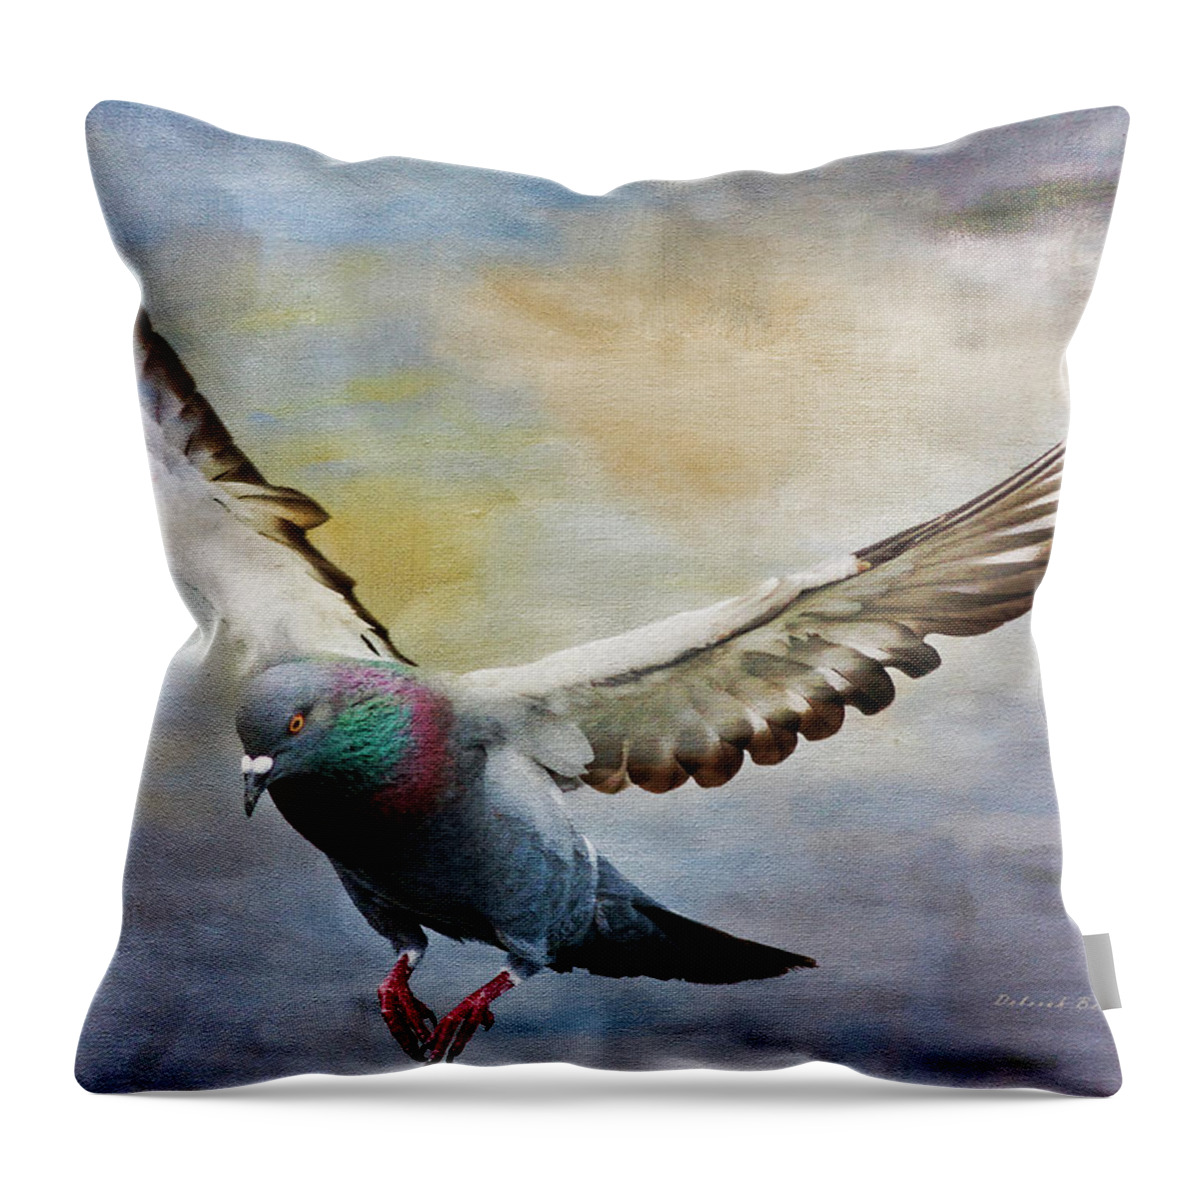 Pigeon Throw Pillow featuring the photograph Pigeon On Wing by Deborah Benoit